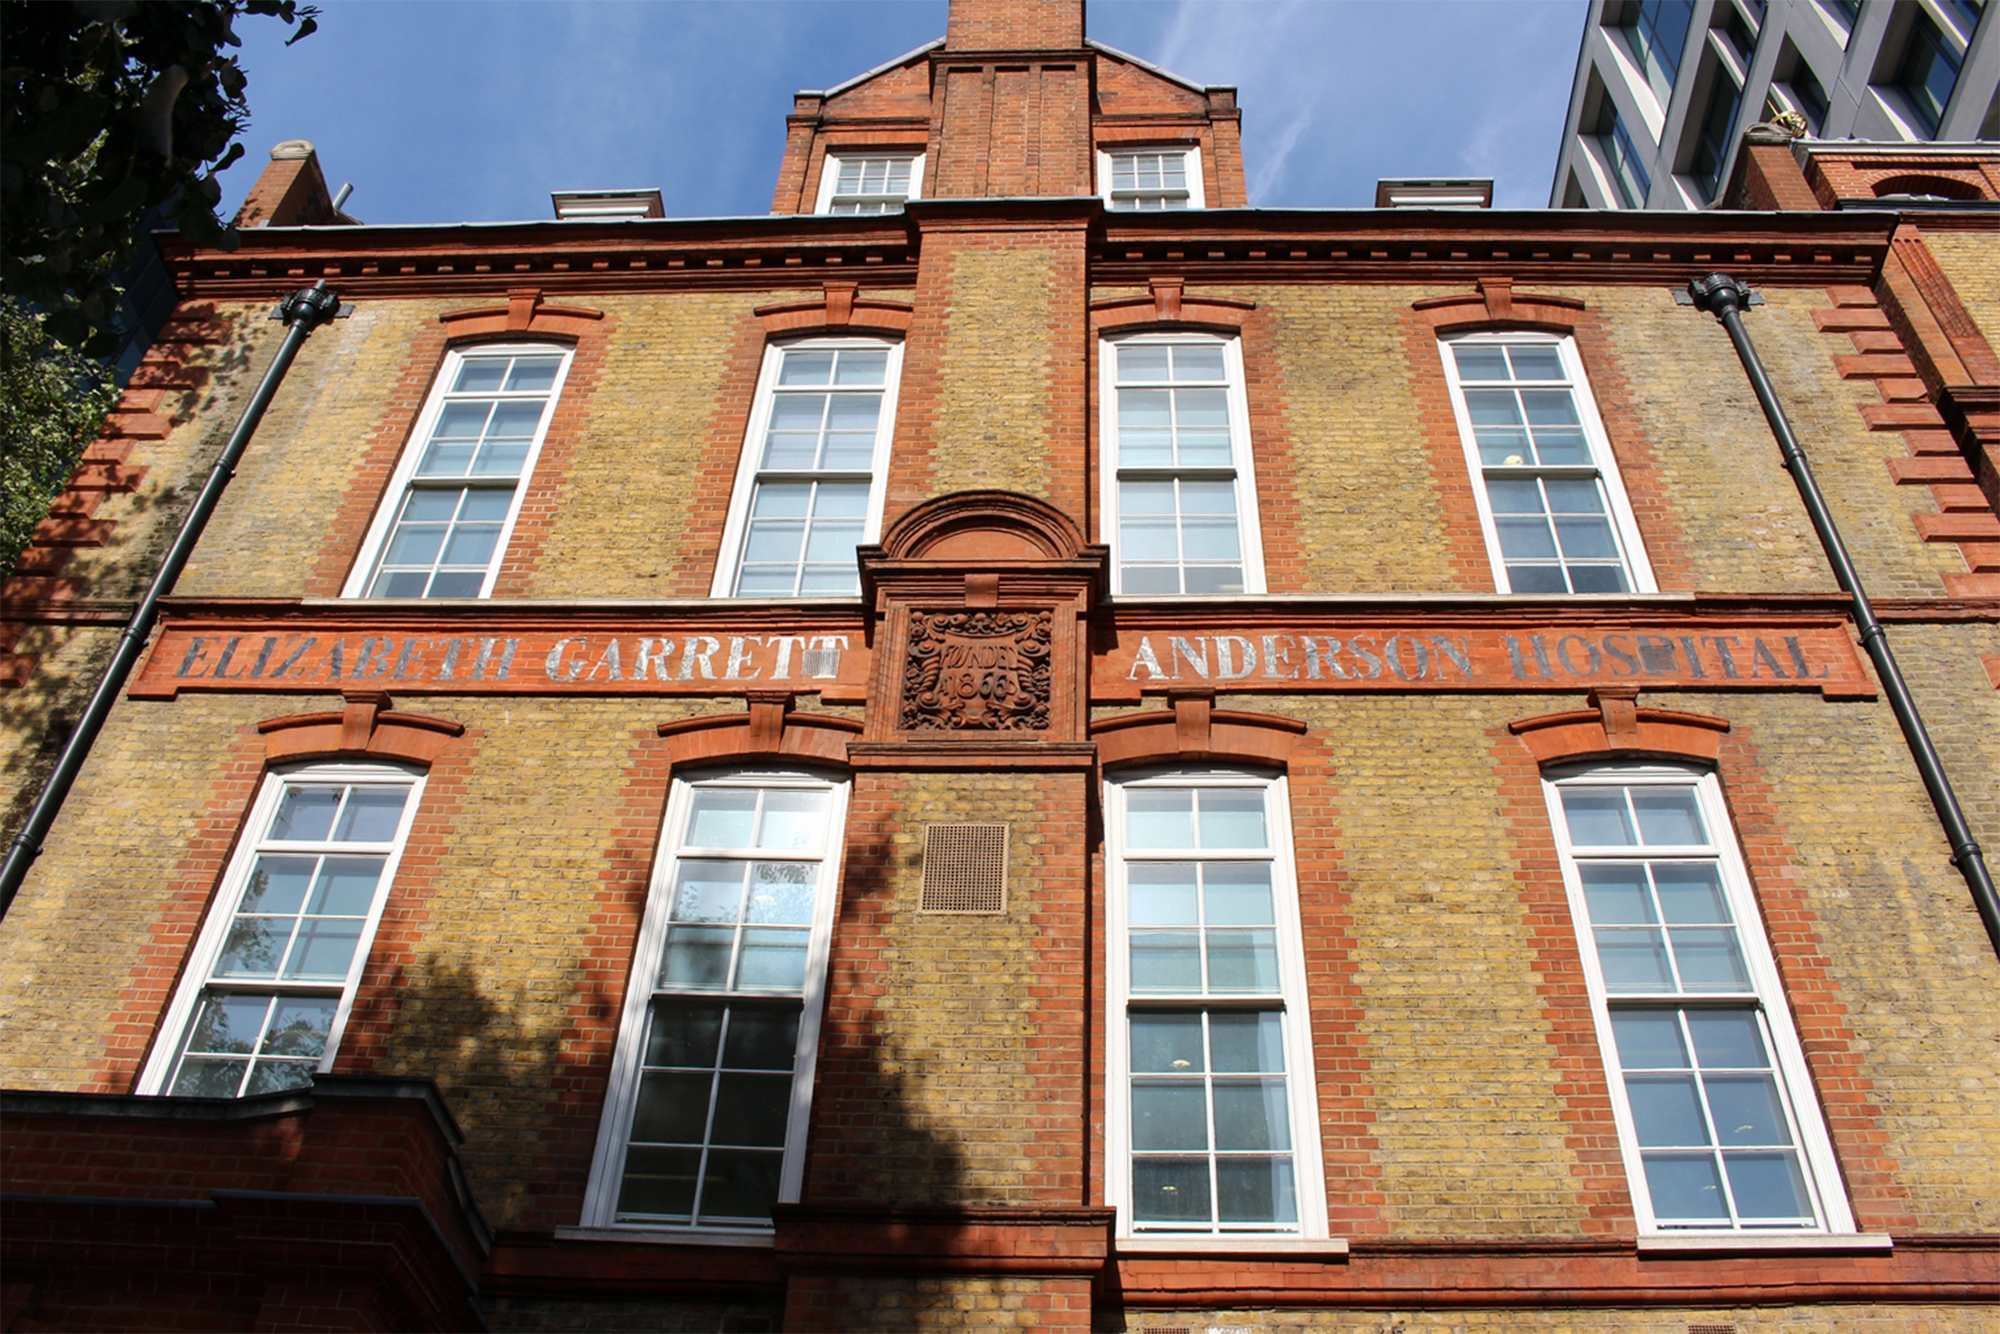 Red brick building with sash windows and the words Elizabeth Garrett Anderson Hospital written halfway up the front facade.